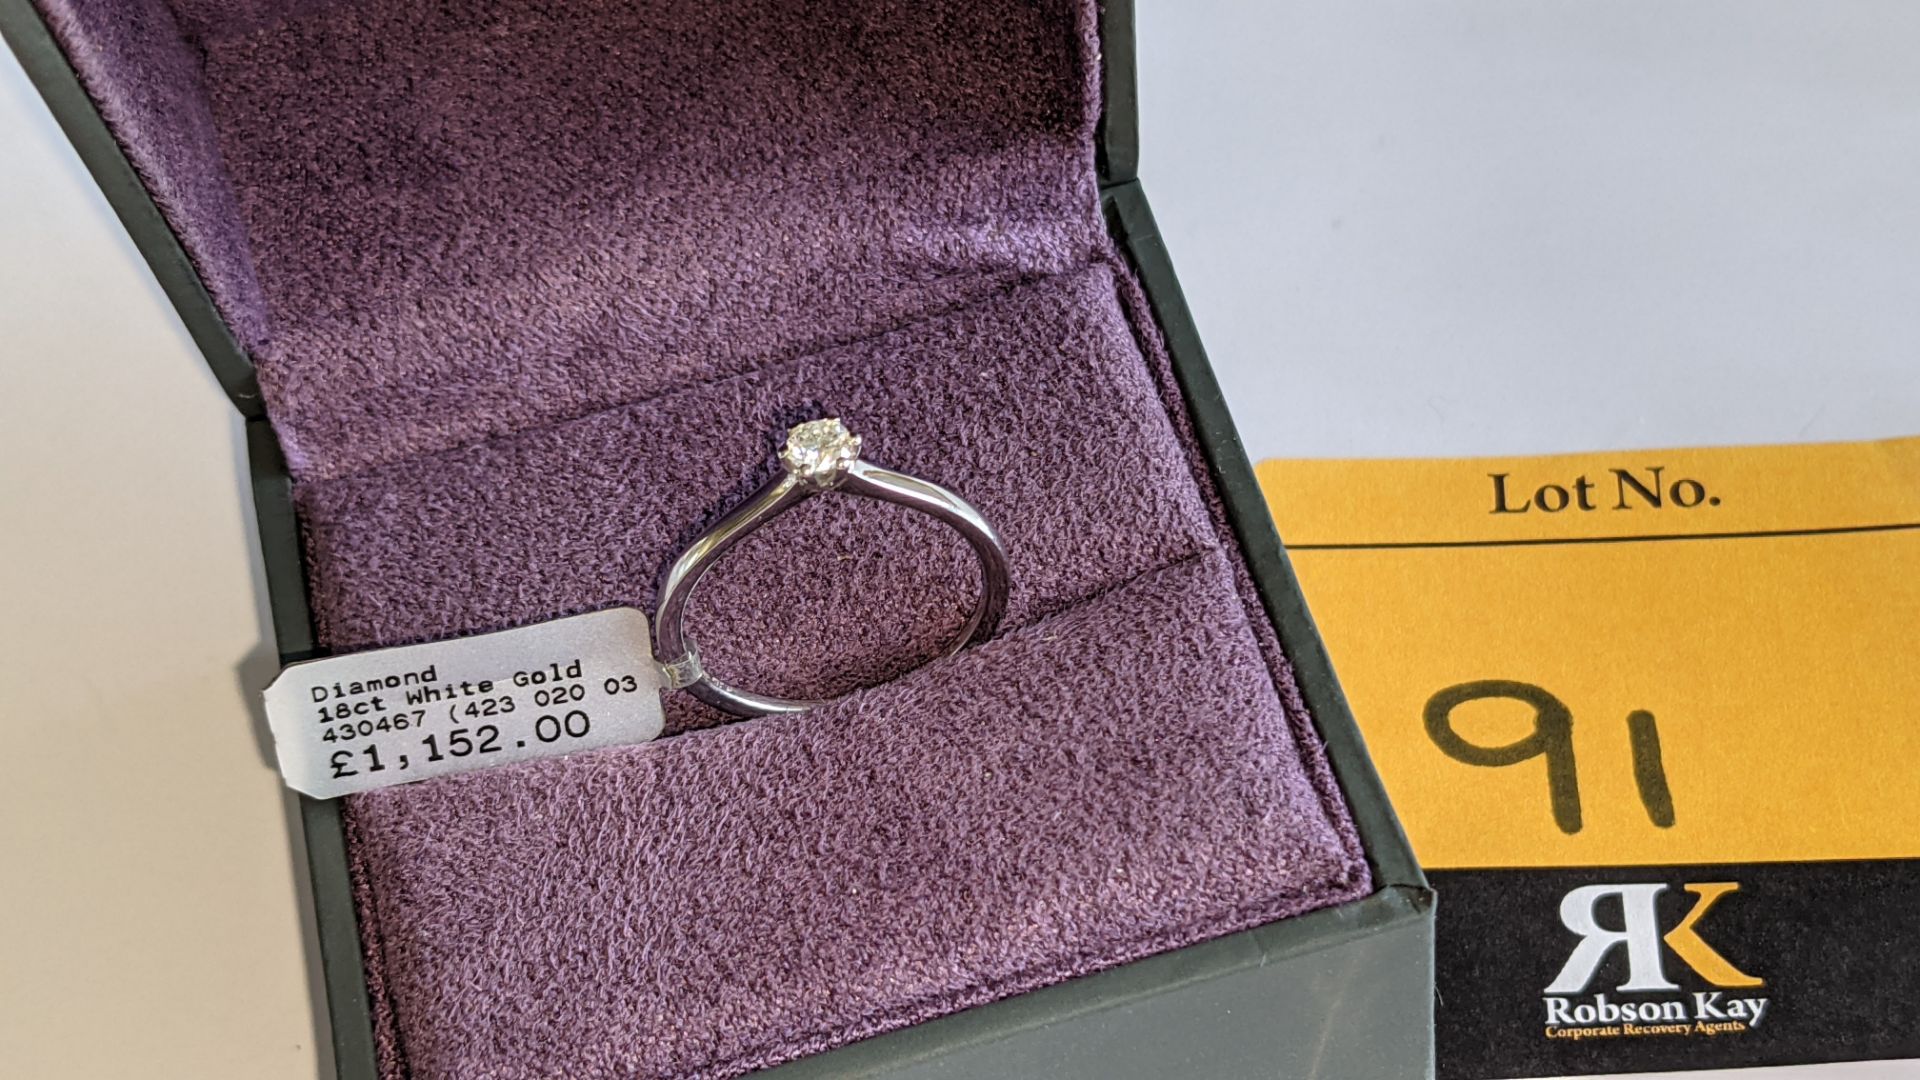 18ct white gold & diamond ring with 0.20ct G/Si brilliant cut diamond RRP £1,152 - Image 15 of 17